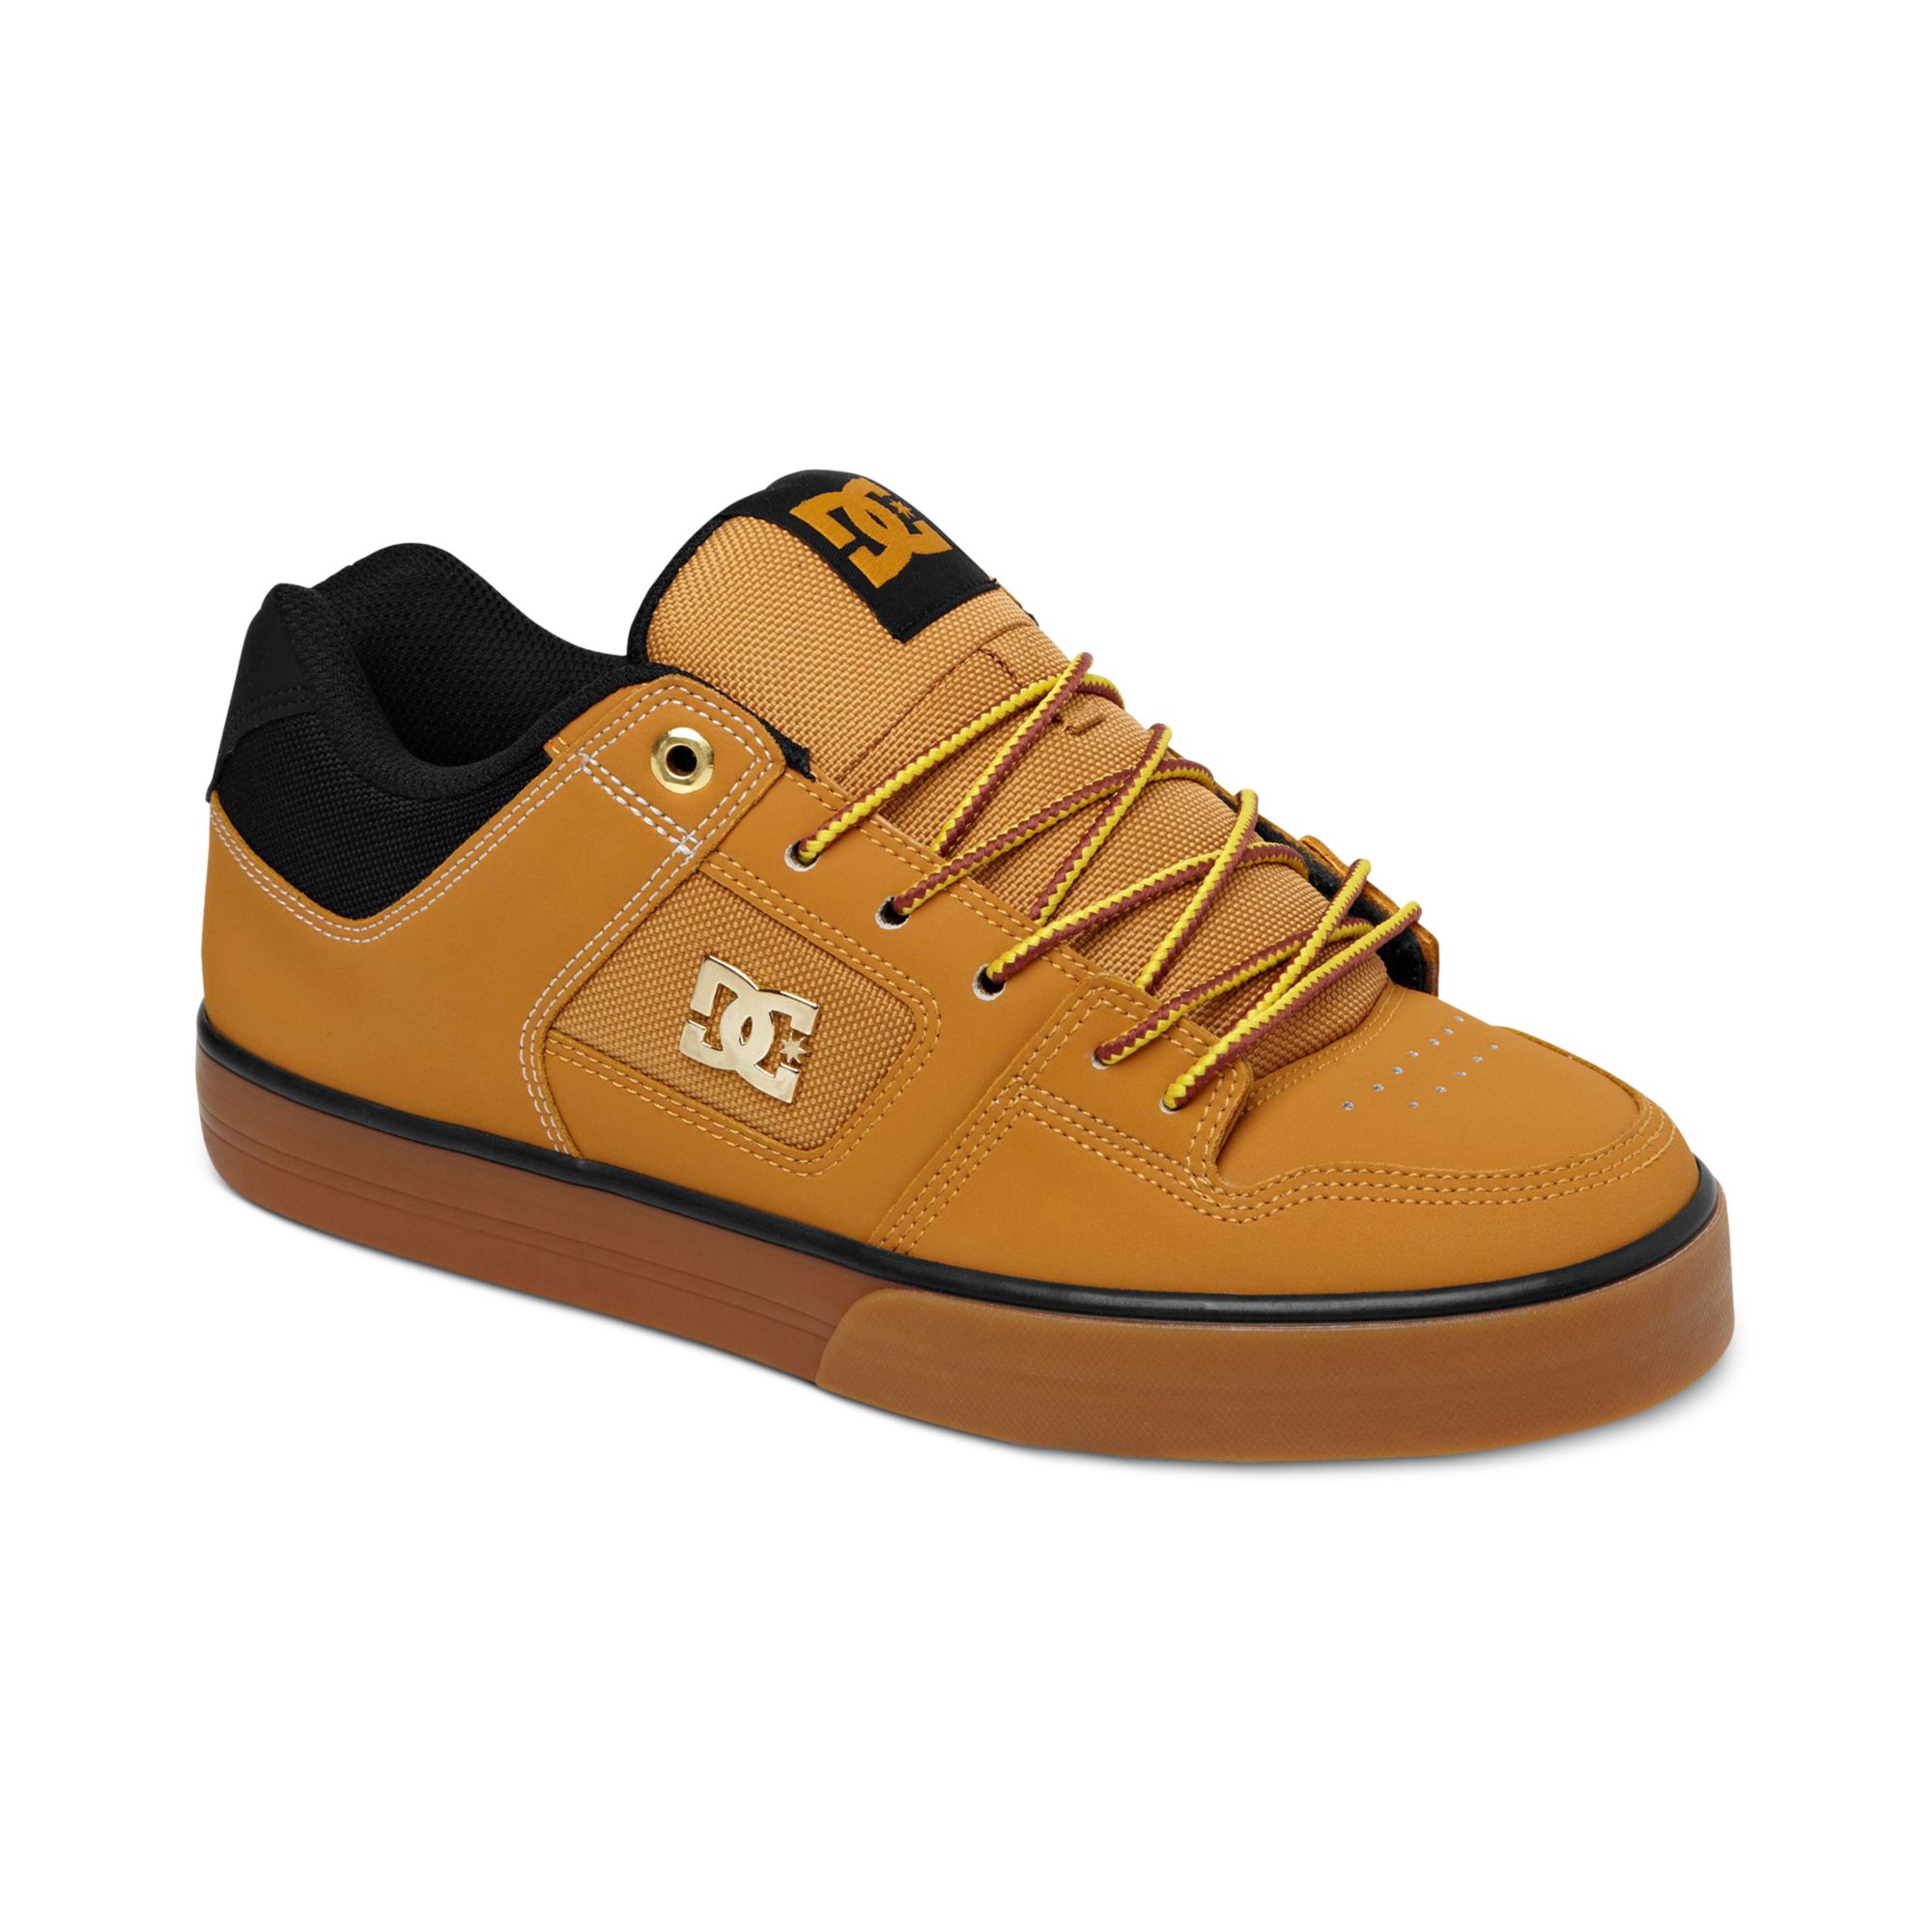 DC Shoes Sneakers in Brown for Men - Lyst